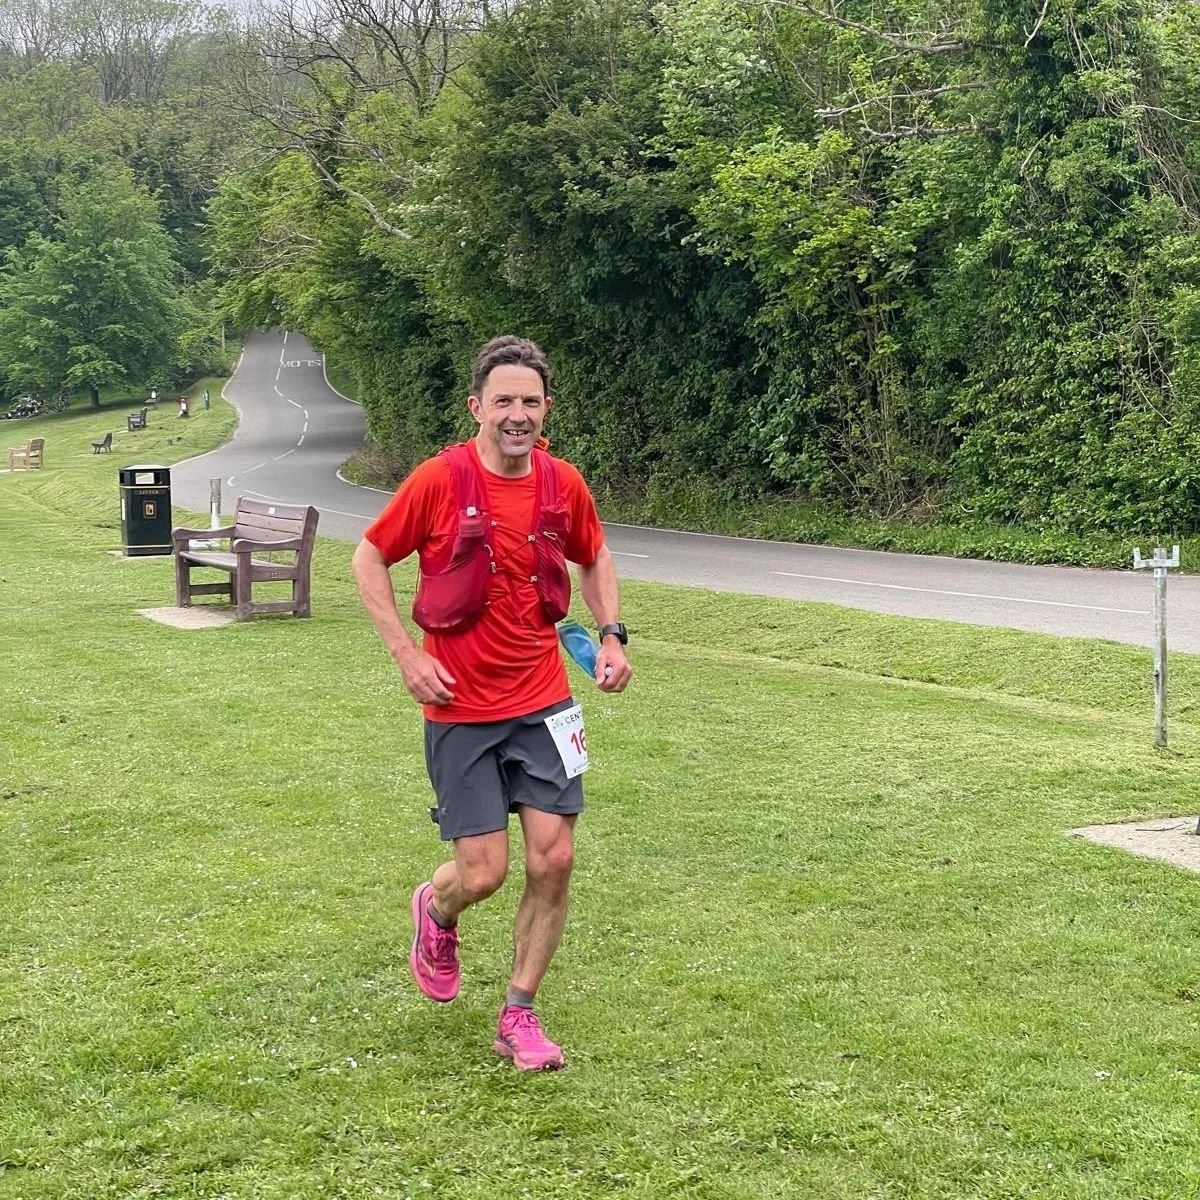 An incredible performance from Michael Williams and Daniel Mann at the North Downs Way 50 today. Michael broke the V50 course record finishing in 07:45:44 and 11th overall and Daniel was 19th in 08:26:52. Extraordinary! @centurionrunning #ndw50